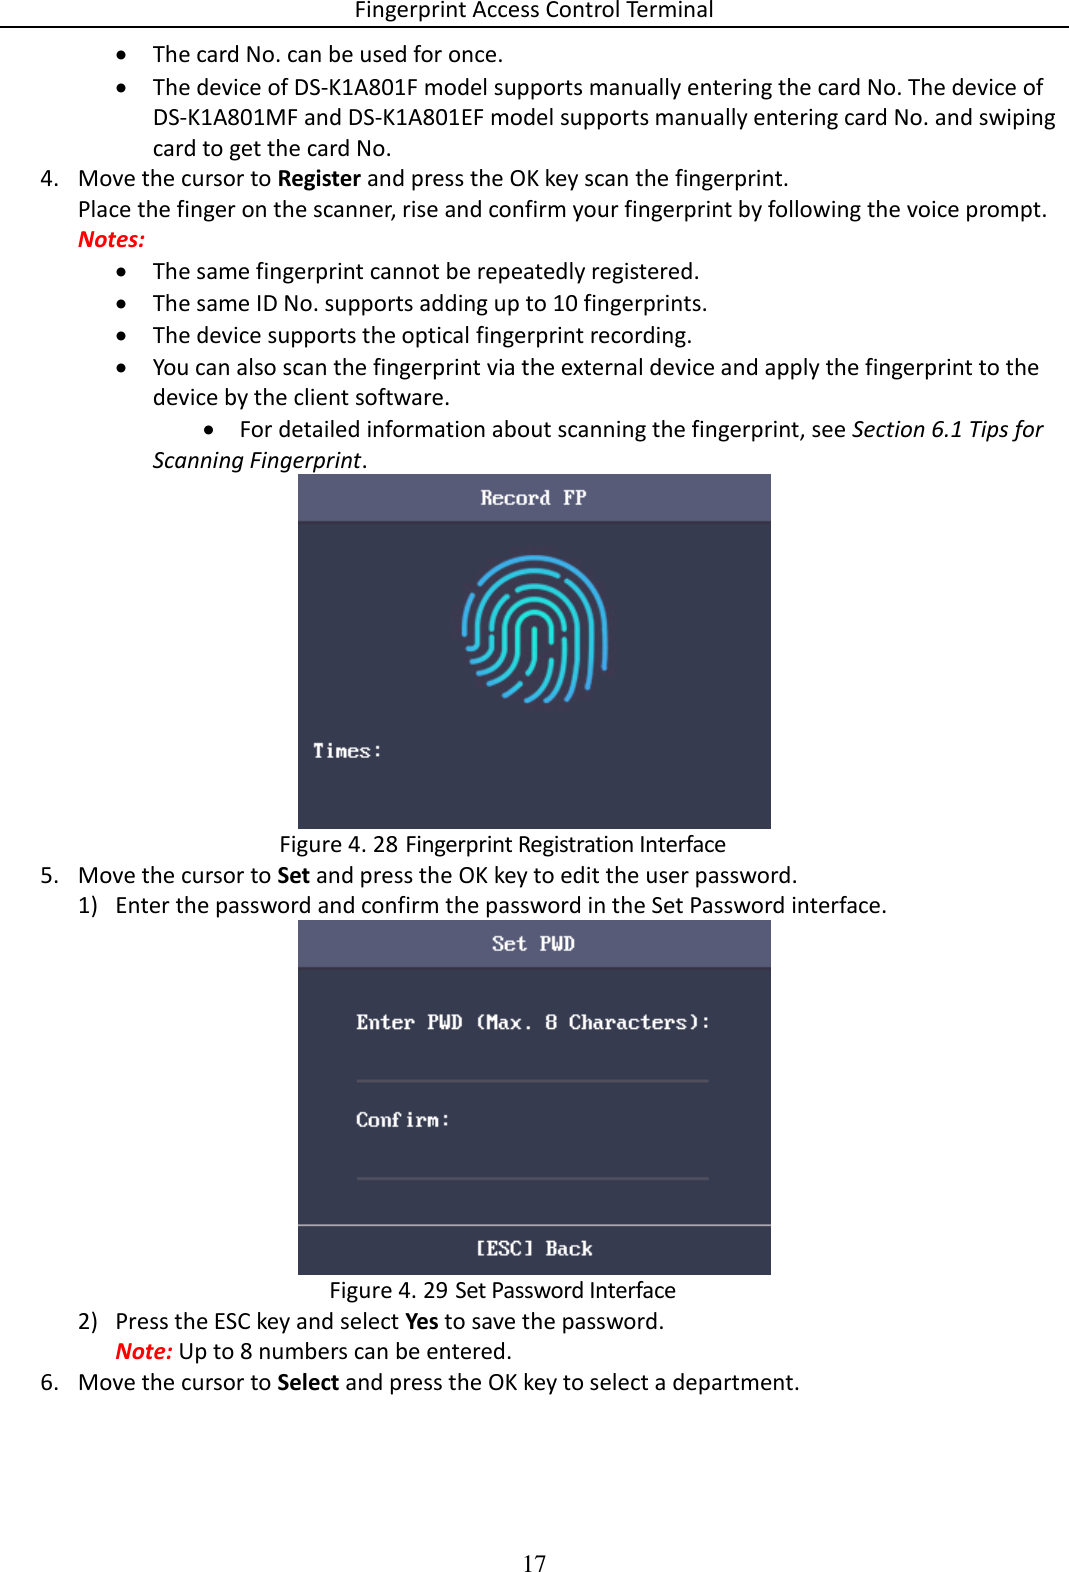 Fingerprint Access Control Terminal 17   The card No. can be used for once.  The device of DS-K1A801F model supports manually entering the card No. The device of DS-K1A801MF and DS-K1A801EF model supports manually entering card No. and swiping card to get the card No. 4. Move the cursor to Register and press the OK key scan the fingerprint. Place the finger on the scanner, rise and confirm your fingerprint by following the voice prompt. Notes:  The same fingerprint cannot be repeatedly registered.  The same ID No. supports adding up to 10 fingerprints.  The device supports the optical fingerprint recording.  You can also scan the fingerprint via the external device and apply the fingerprint to the device by the client software.  For detailed information about scanning the fingerprint, see Section 6.1 Tips for Scanning Fingerprint.   Fingerprint Registration Interface Figure 4. 285. Move the cursor to Set and press the OK key to edit the user password. 1) Enter the password and confirm the password in the Set Password interface.   Set Password Interface Figure 4. 292) Press the ESC key and select Yes to save the password. Note: Up to 8 numbers can be entered. 6. Move the cursor to Select and press the OK key to select a department. 